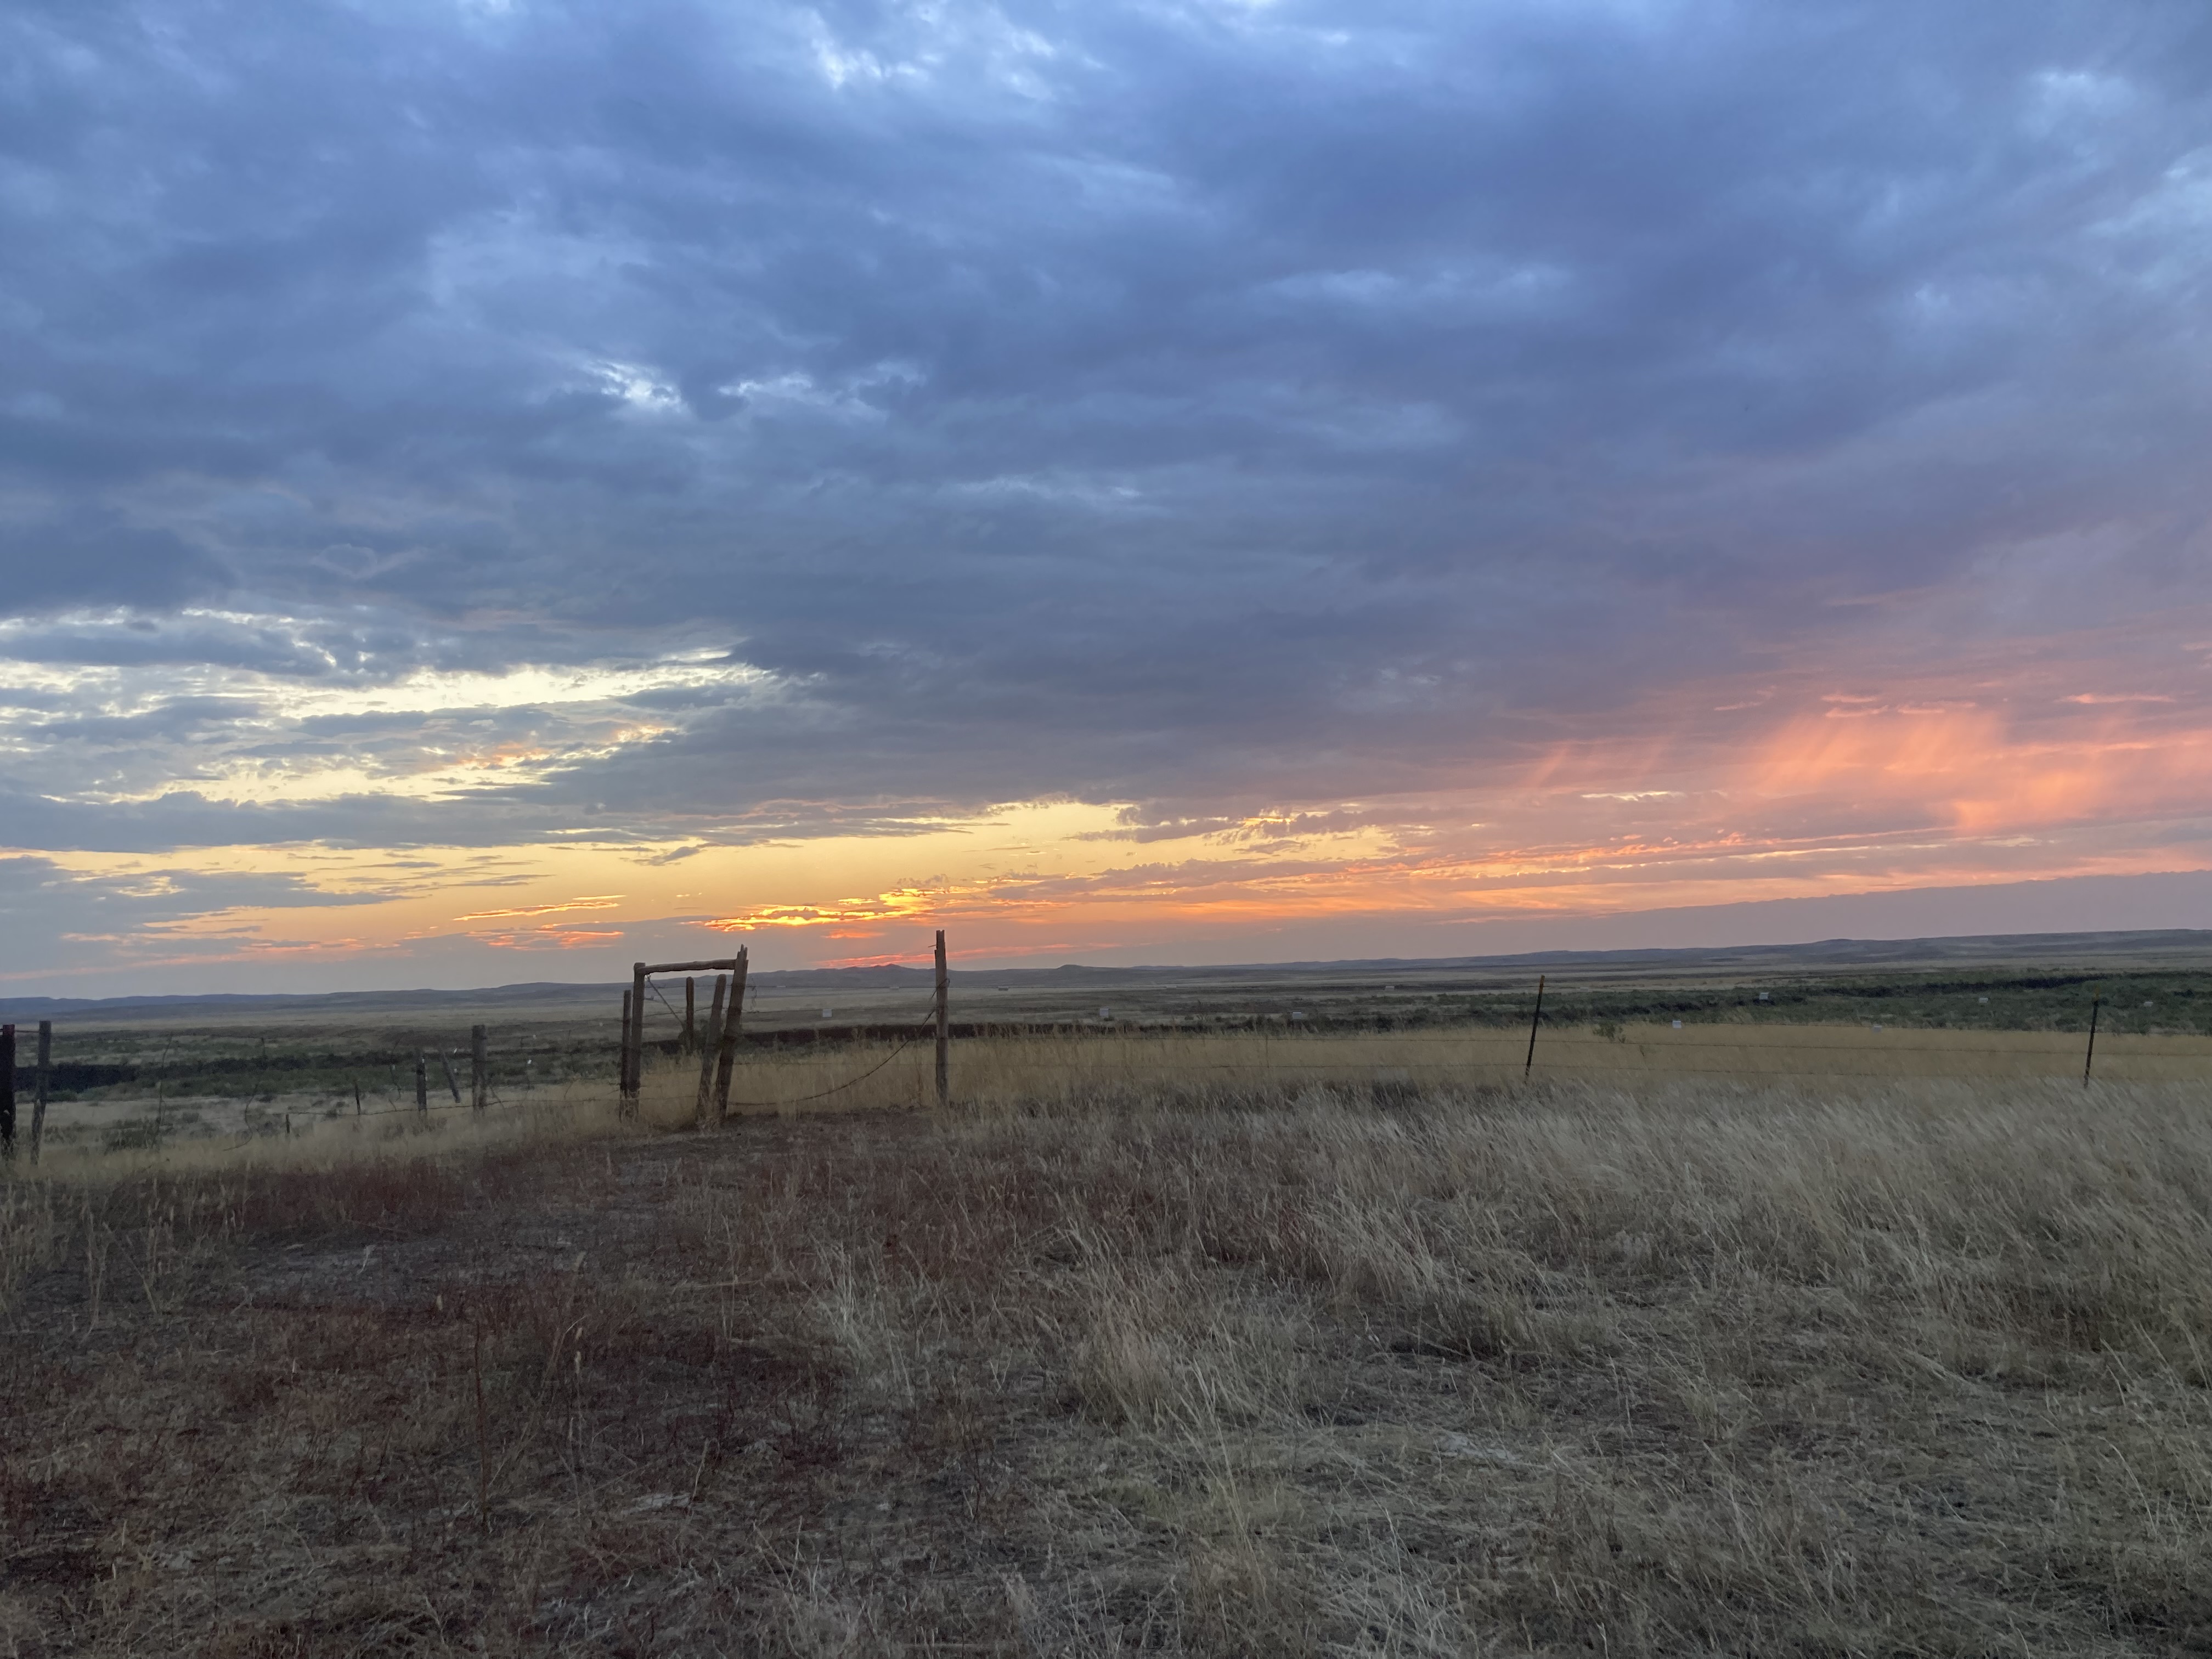 Sunset seen from the Great Plains